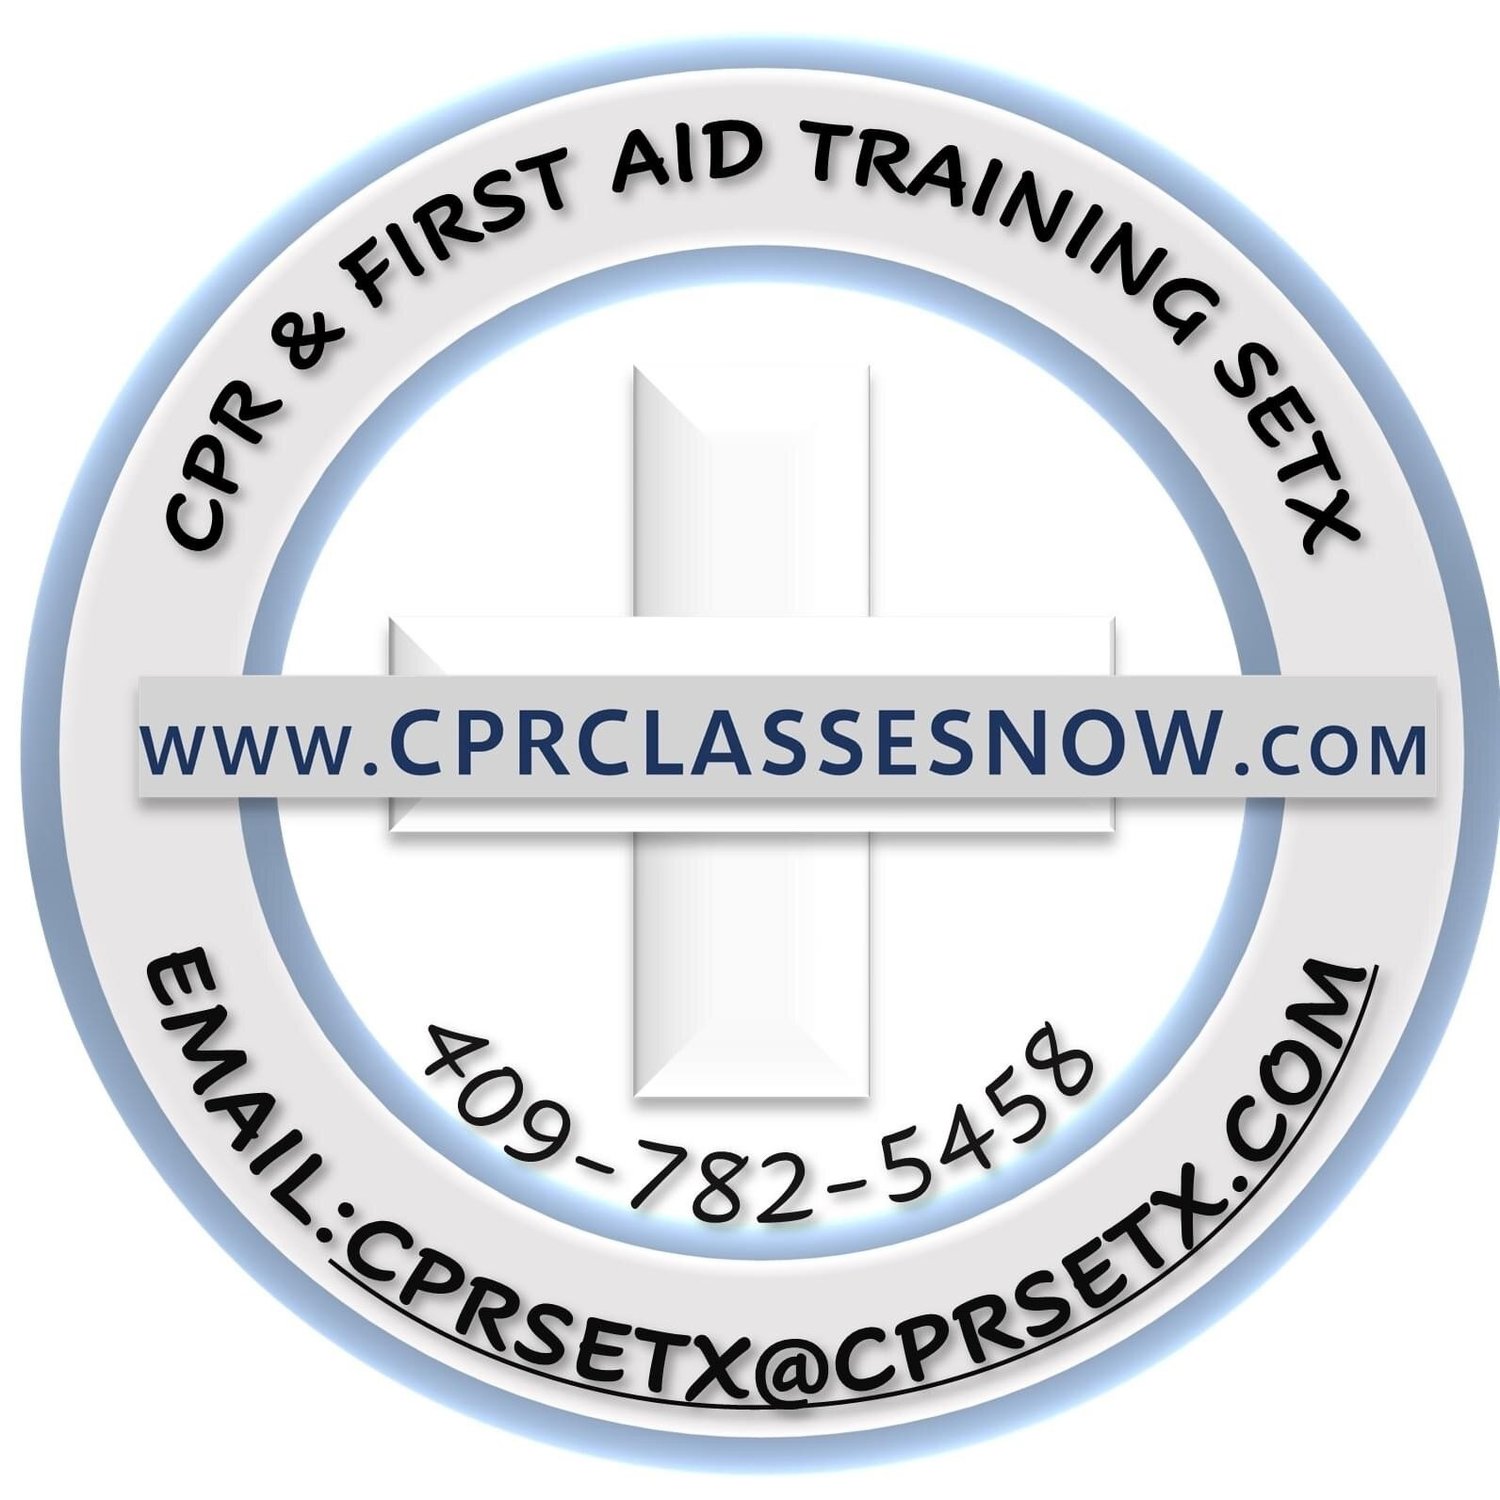   CPR & FIRST AID TRAINING SOUTHEAST TEXAS